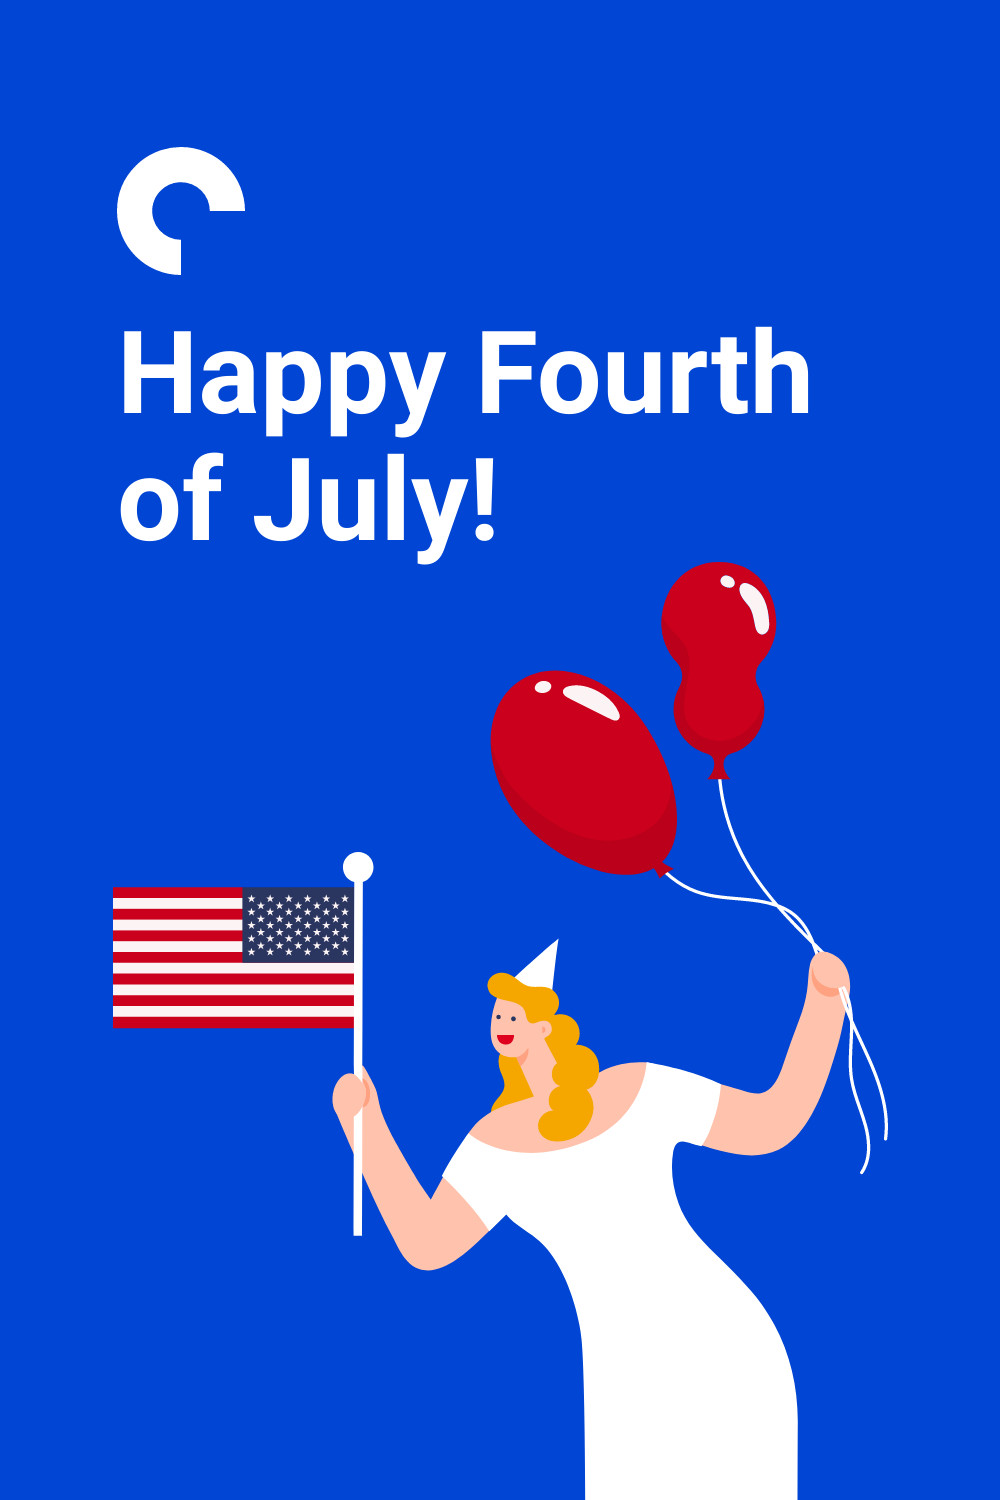 Happy Fourth of July Festive Woman Illustration Facebook Cover 820x360